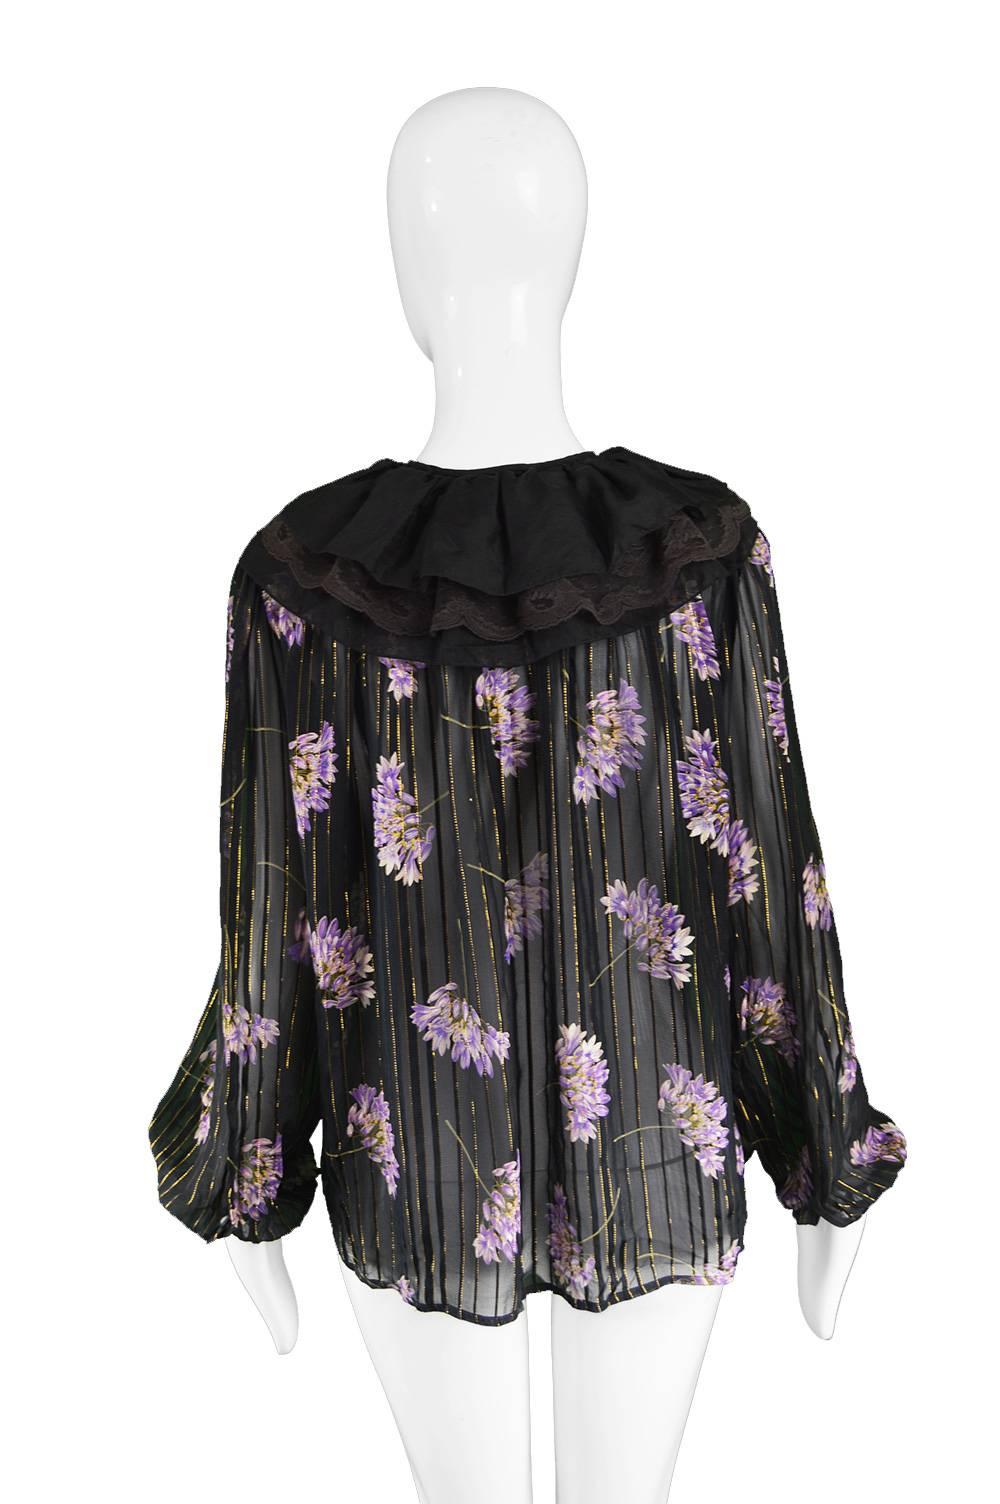 Valentino Silk and Lamé Chiffon Sheer Floral Ruffle Collar Vintage Blouse, 1980s For Sale 1